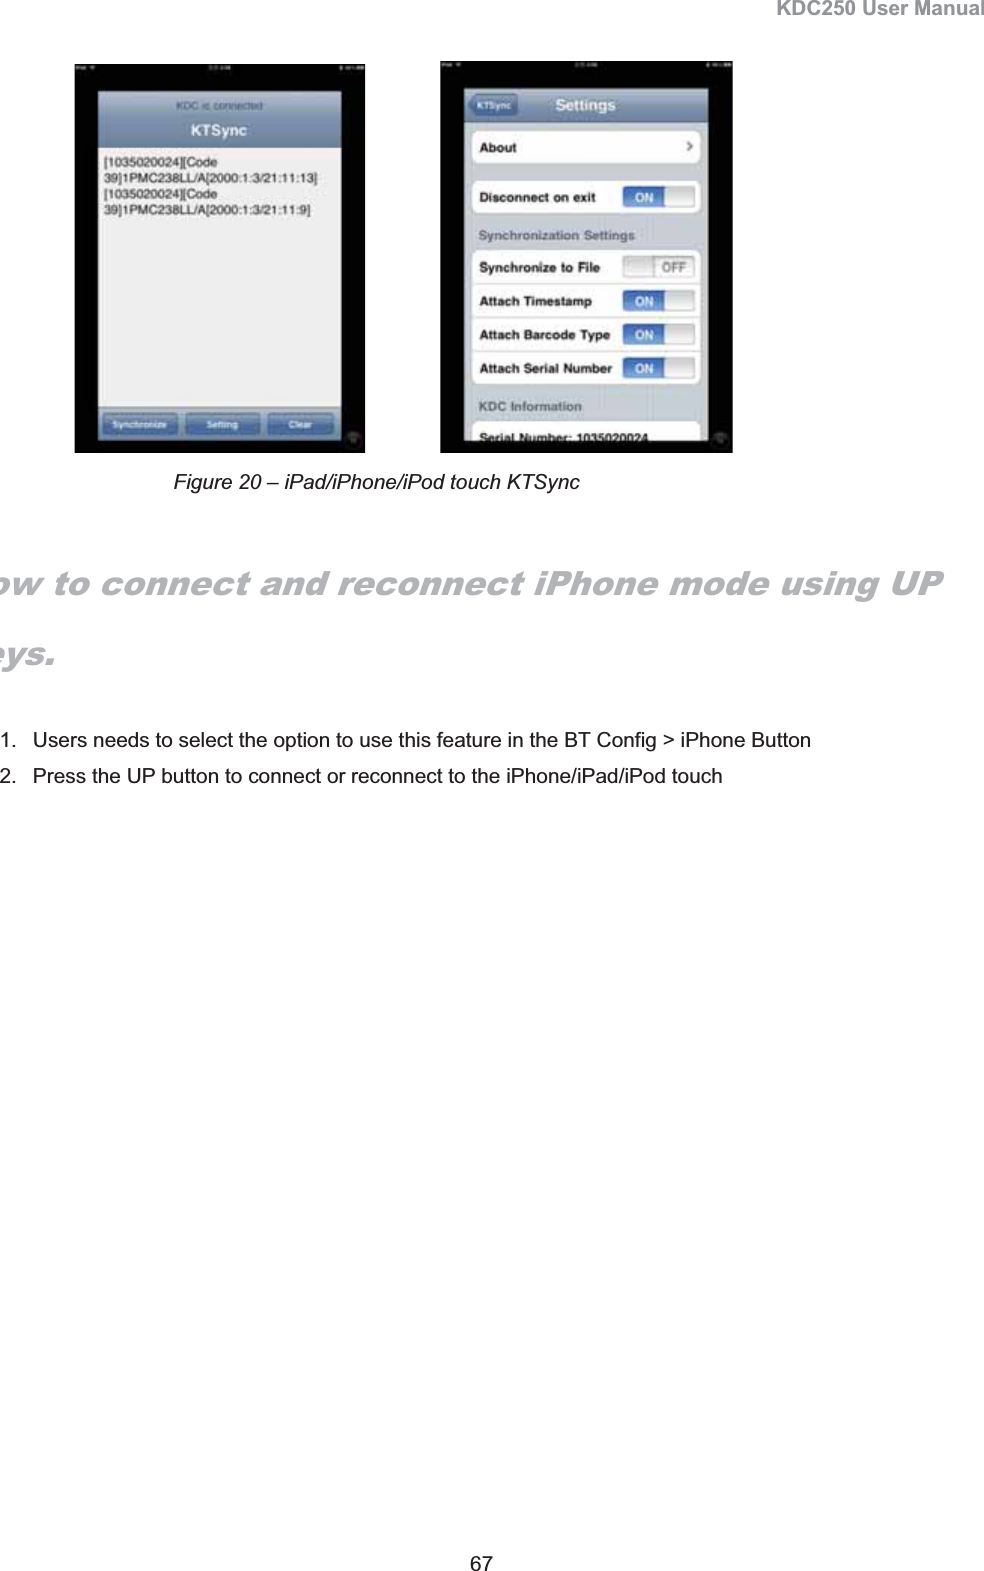 KDC250 User Manual 67                   How to connect and reconnect iPhone mode using UP keys.1.  Users needs to select the option to use this feature in the BT Config &gt; iPhone Button 2.  Press the UP button to connect or reconnect to the iPhone/iPad/iPod touch Figure 20 – iPad/iPhone/iPod touch KTSync